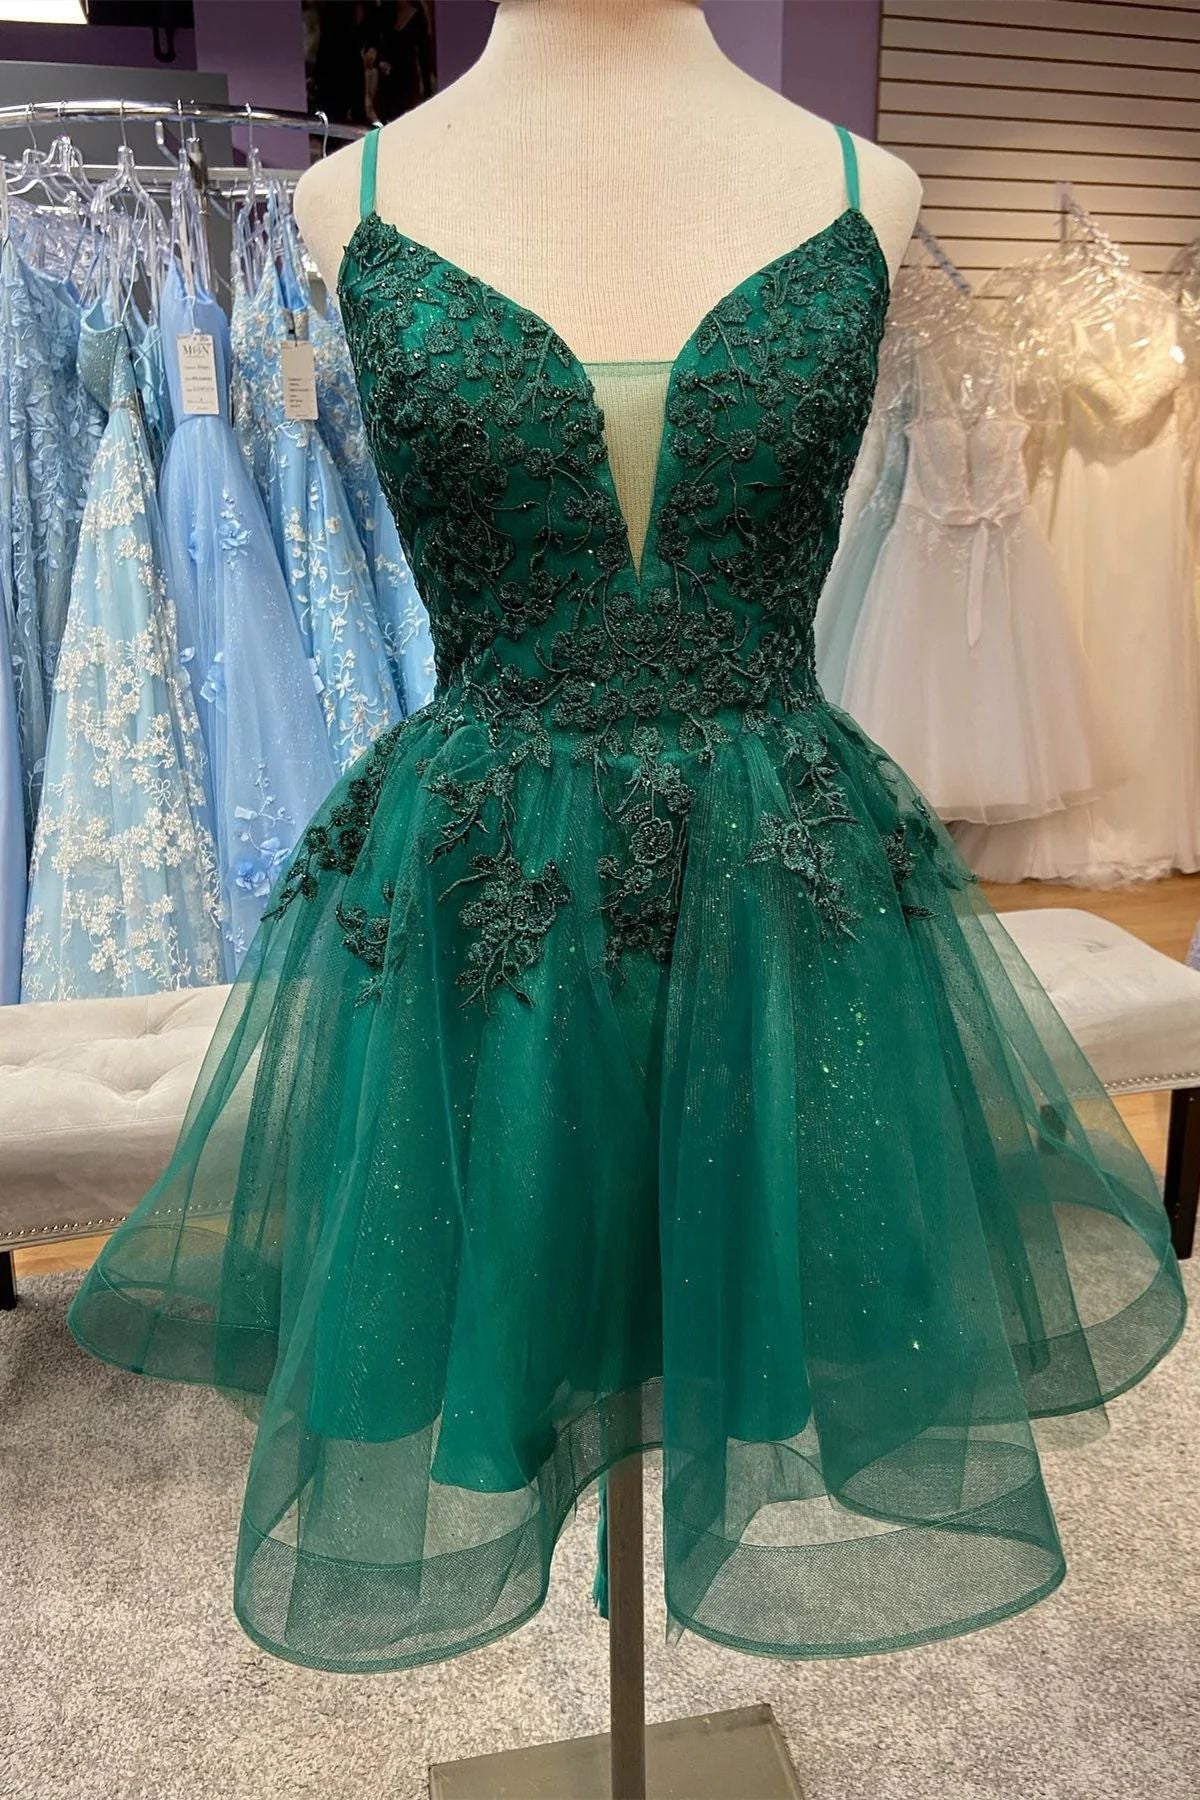 Emerald Green Lace Short Homecoming Dress - DollyGown